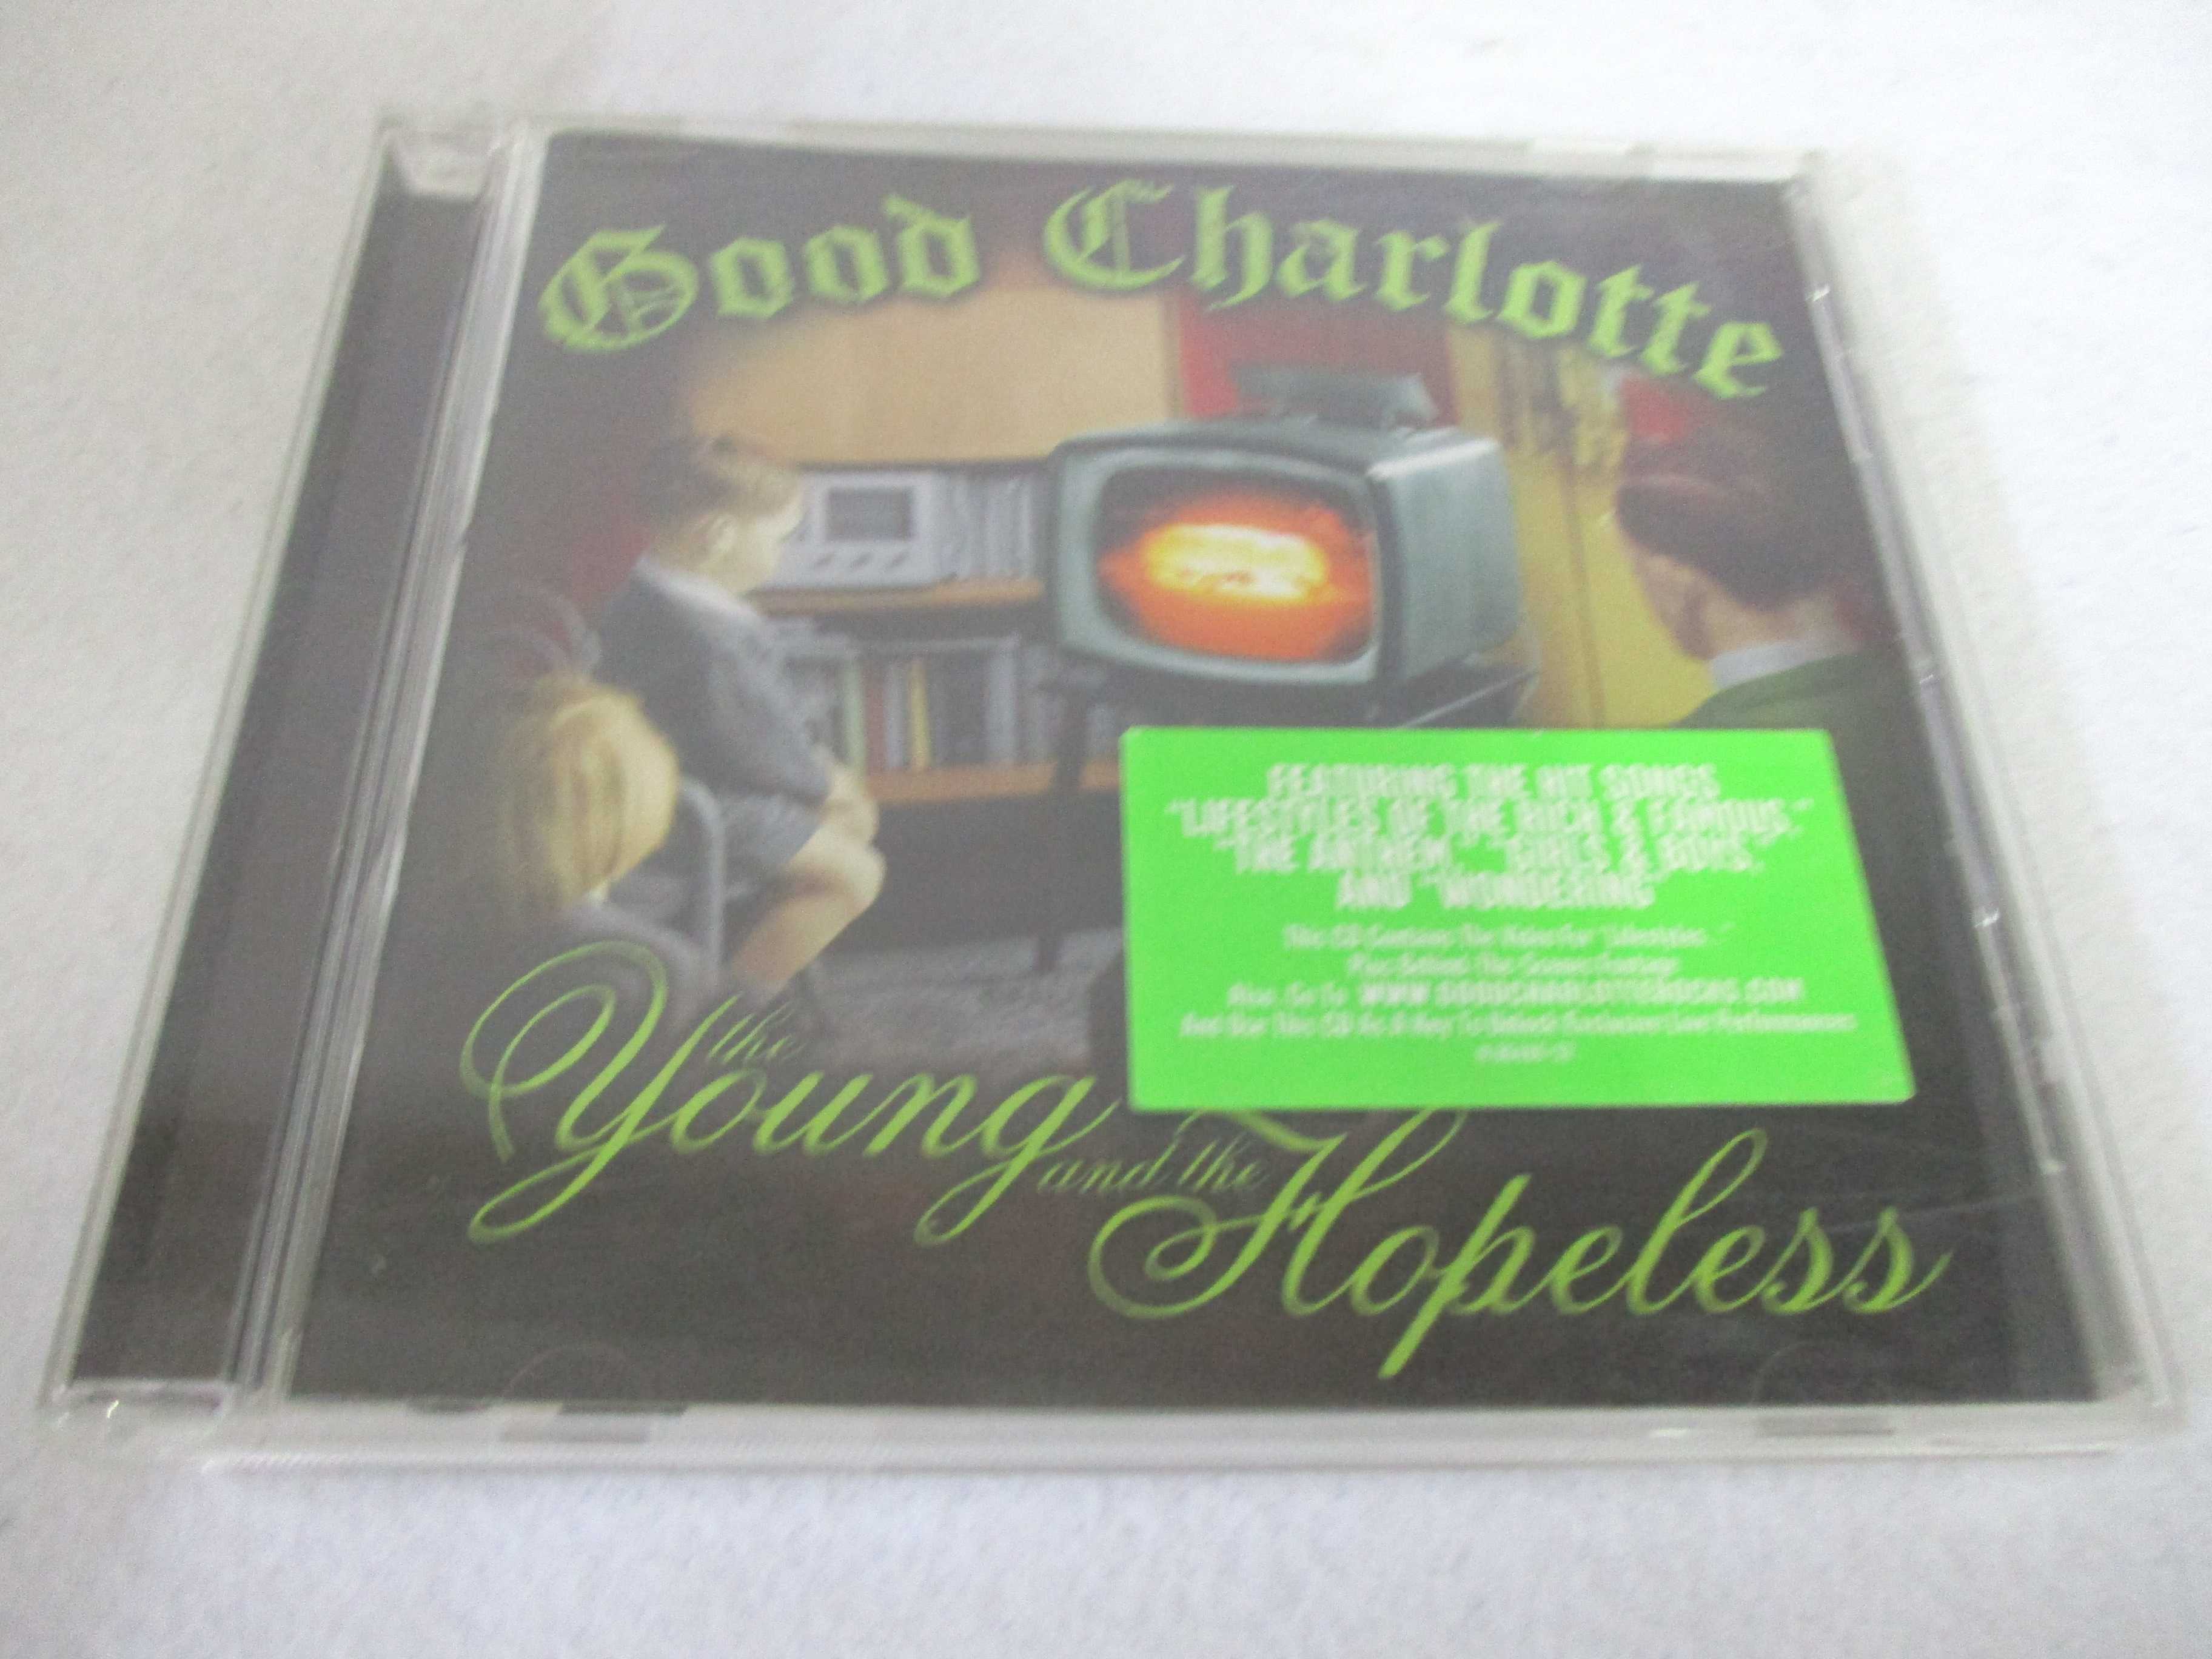 AC05882 yÁz yCDz The young and the hopeless/Good Charlotte